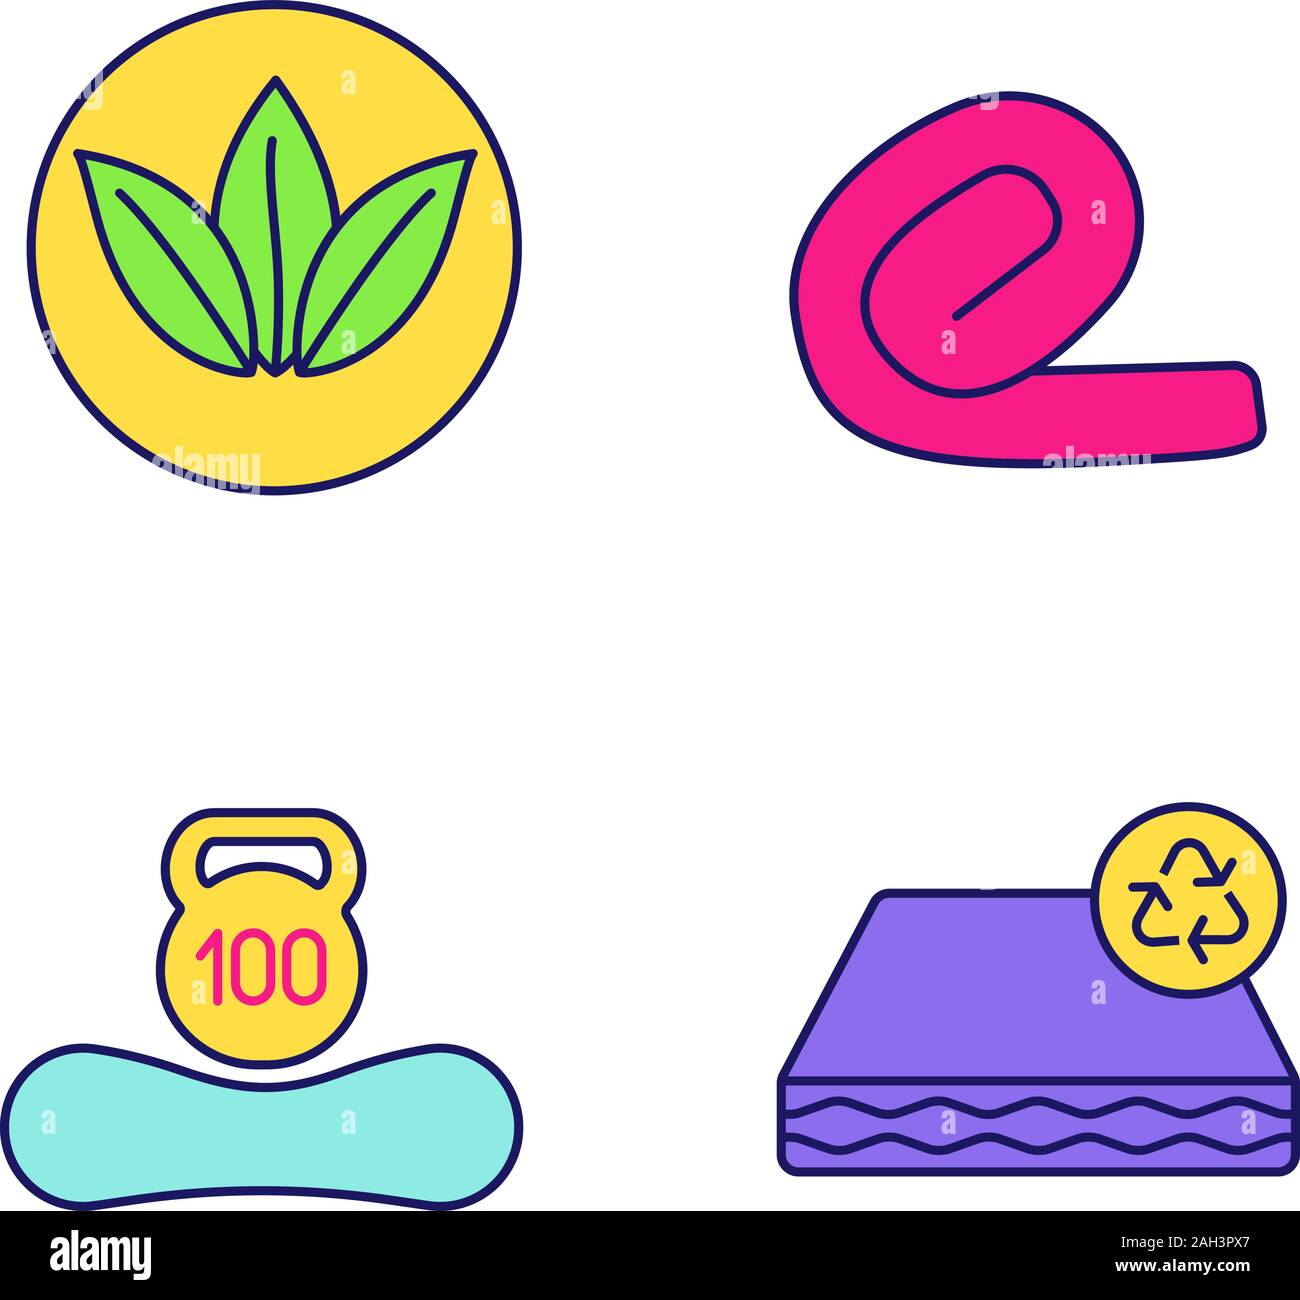 Orthopedic mattress color icons set. Ecological, recyclable and reusable property, weight limit, springless roll up mattress. Isolated vector illustra Stock Vector